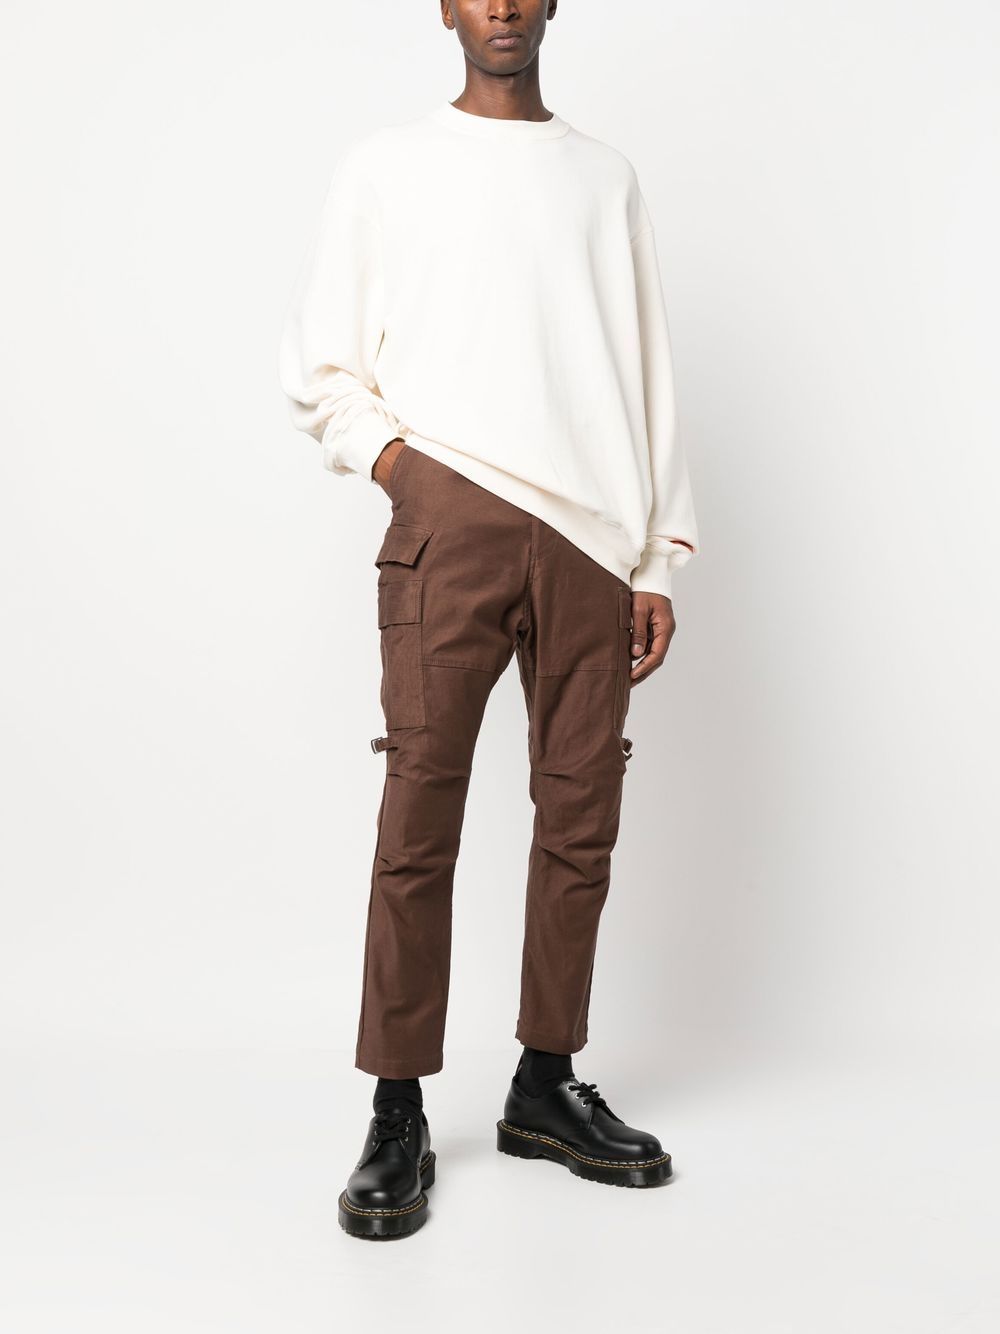 Image 2 of Undercover pantalones cargo tapered